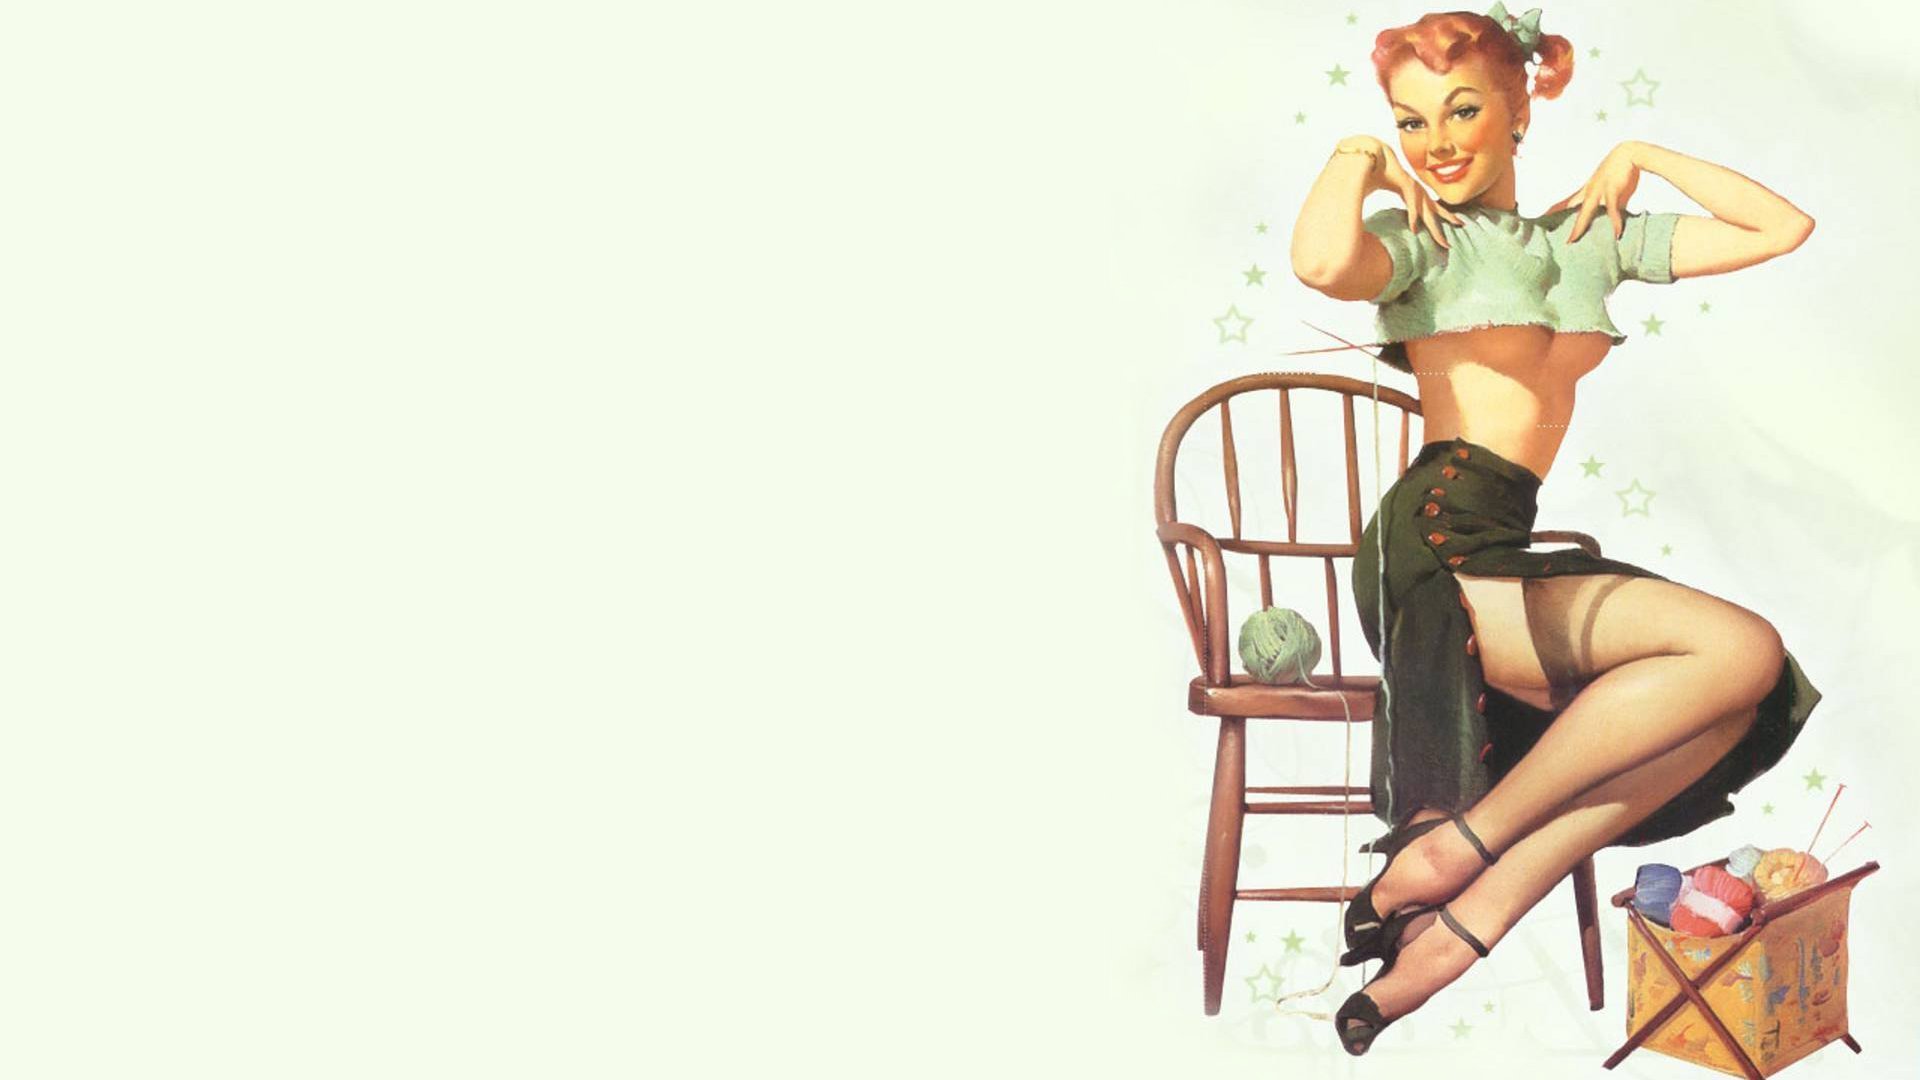  HD pin up girls wallpapers Specially for pin up girls and models 1920x1080